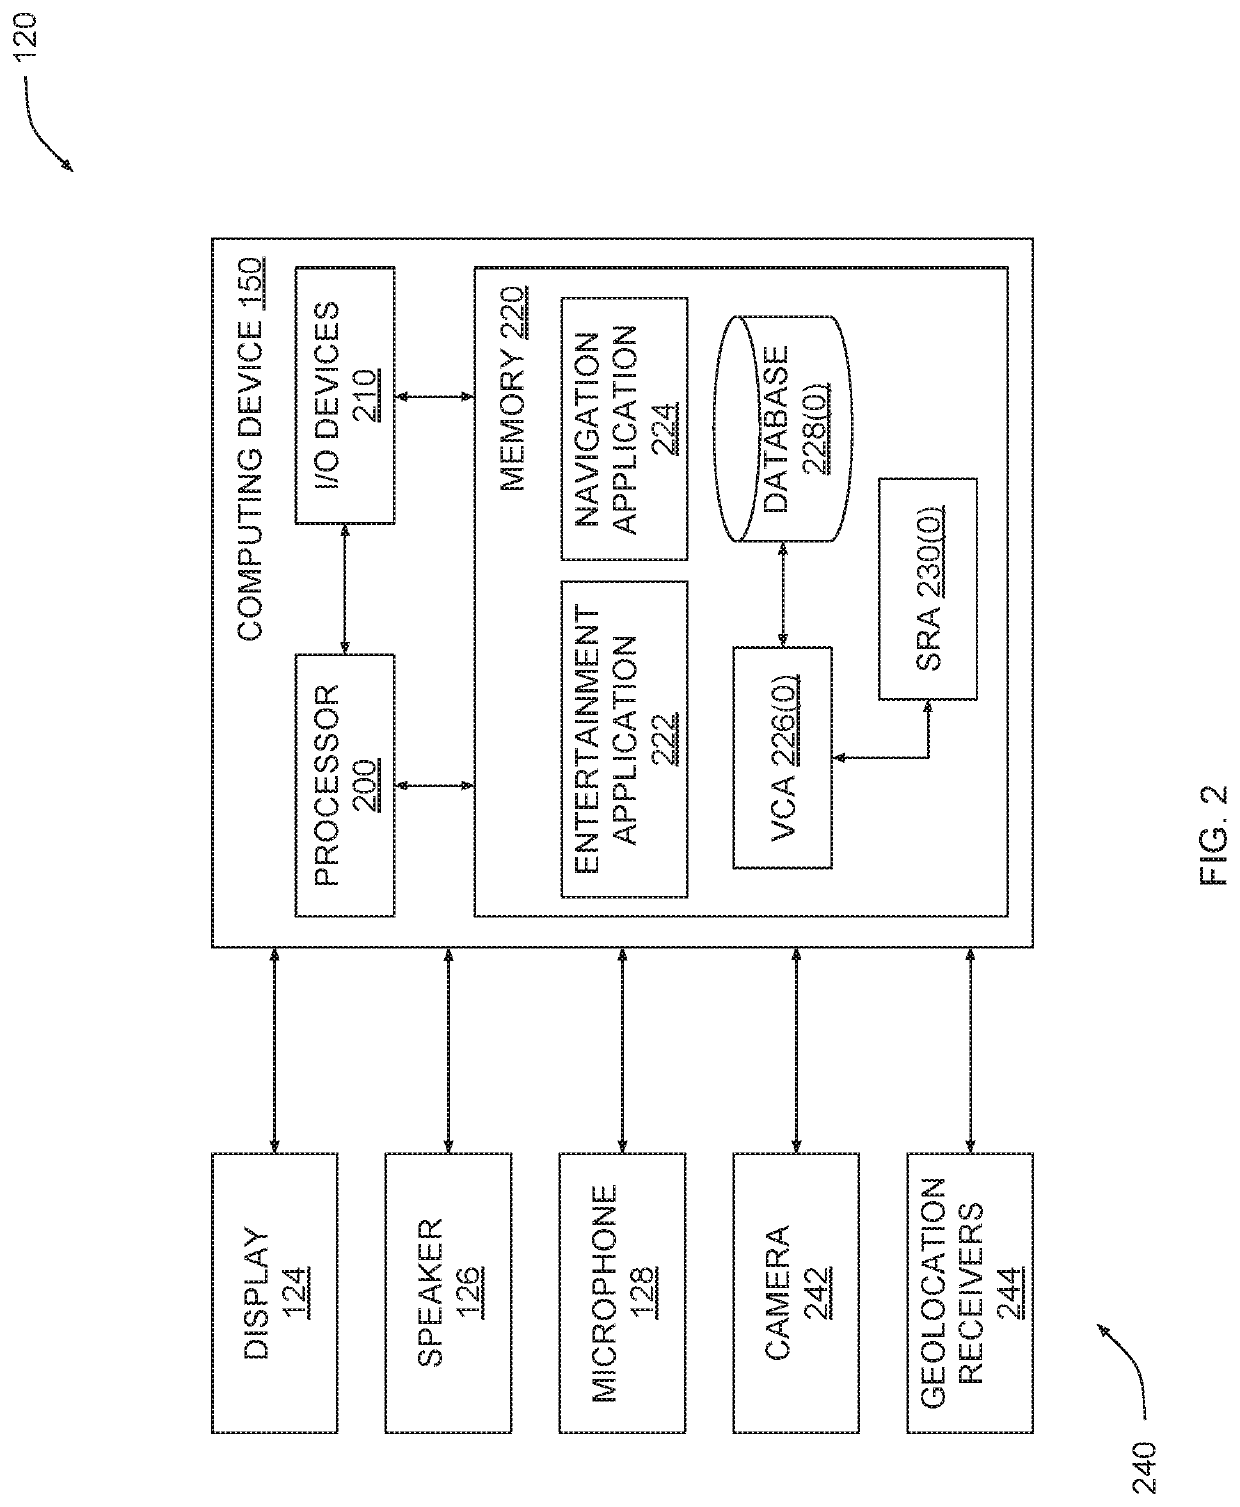 Configurable speech interface for vehicle infotainment systems